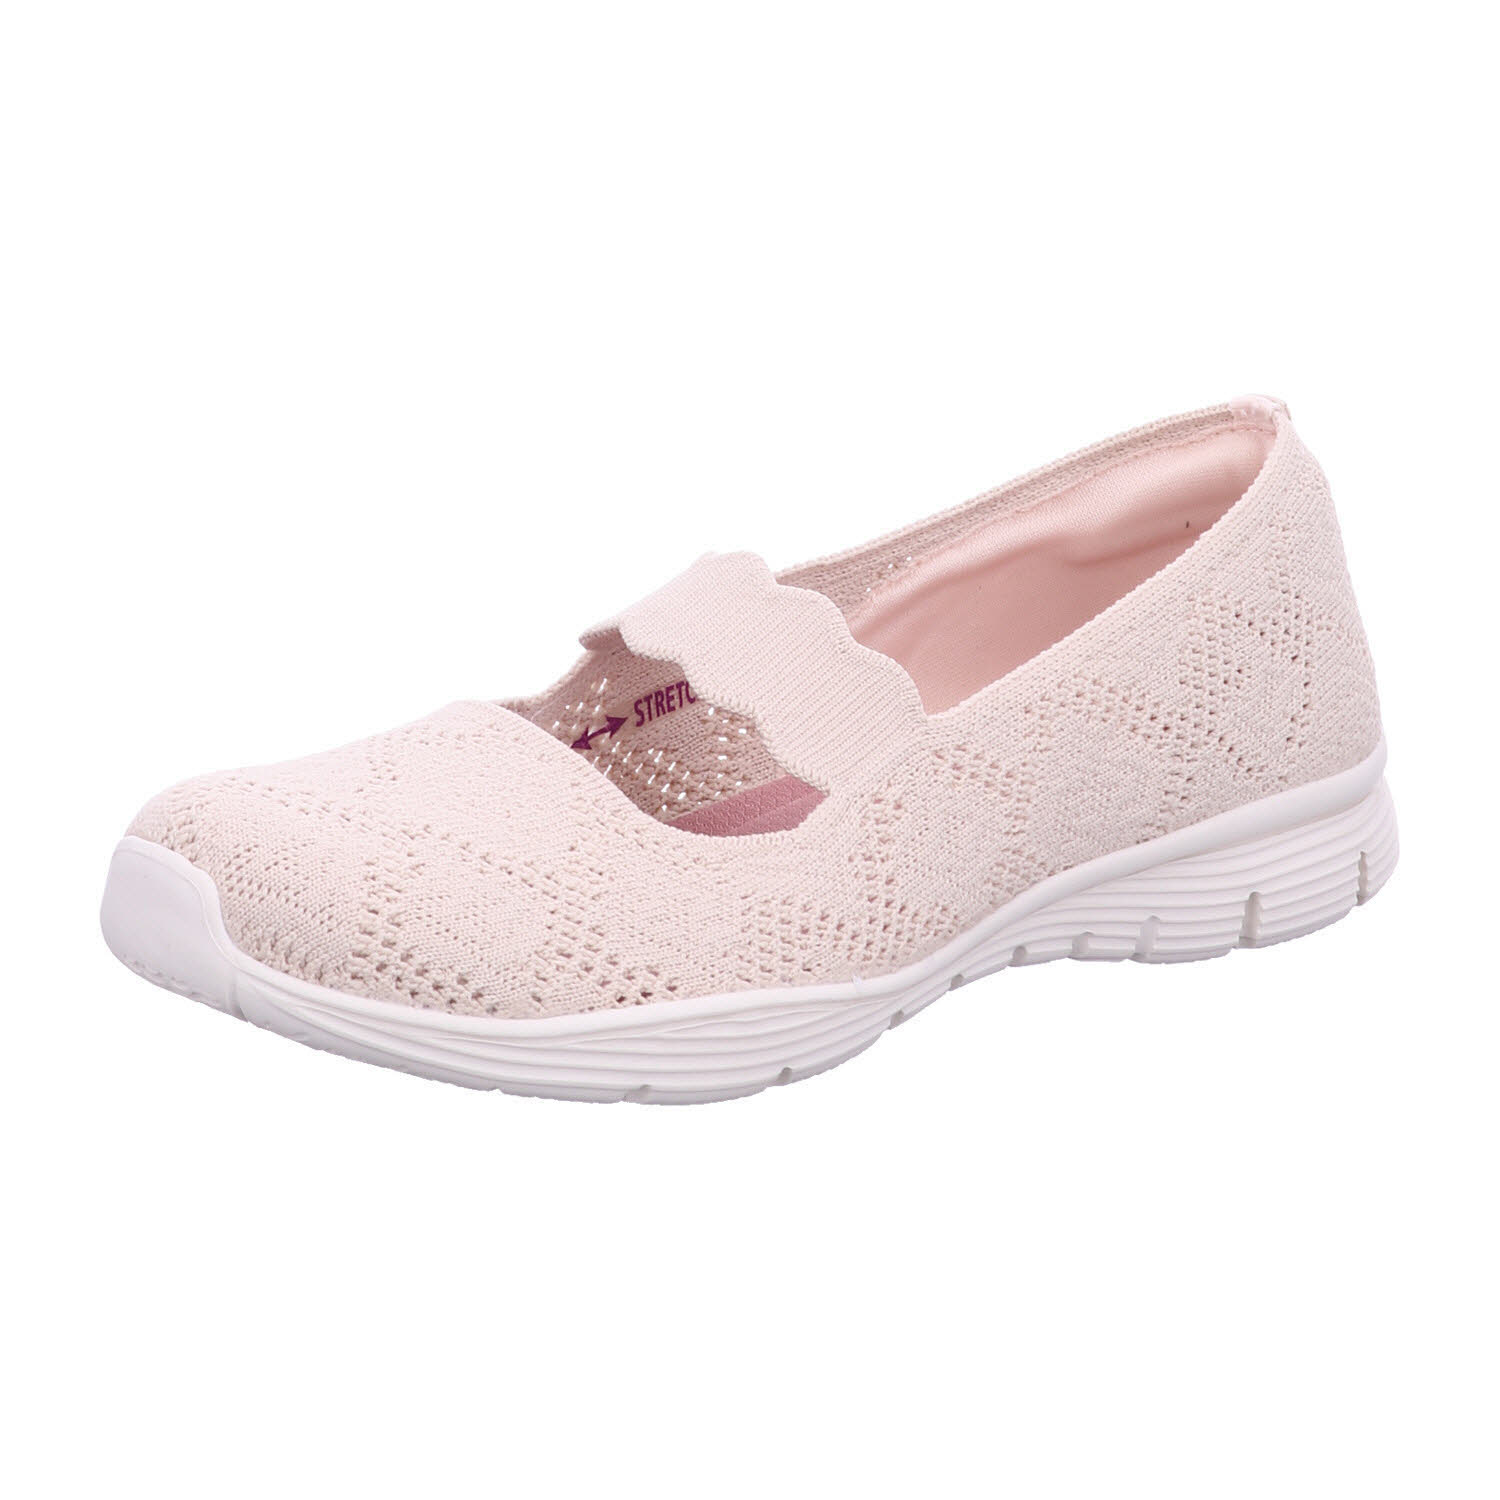 Skechers Ballerina SEAGER - CASUAL PARTY